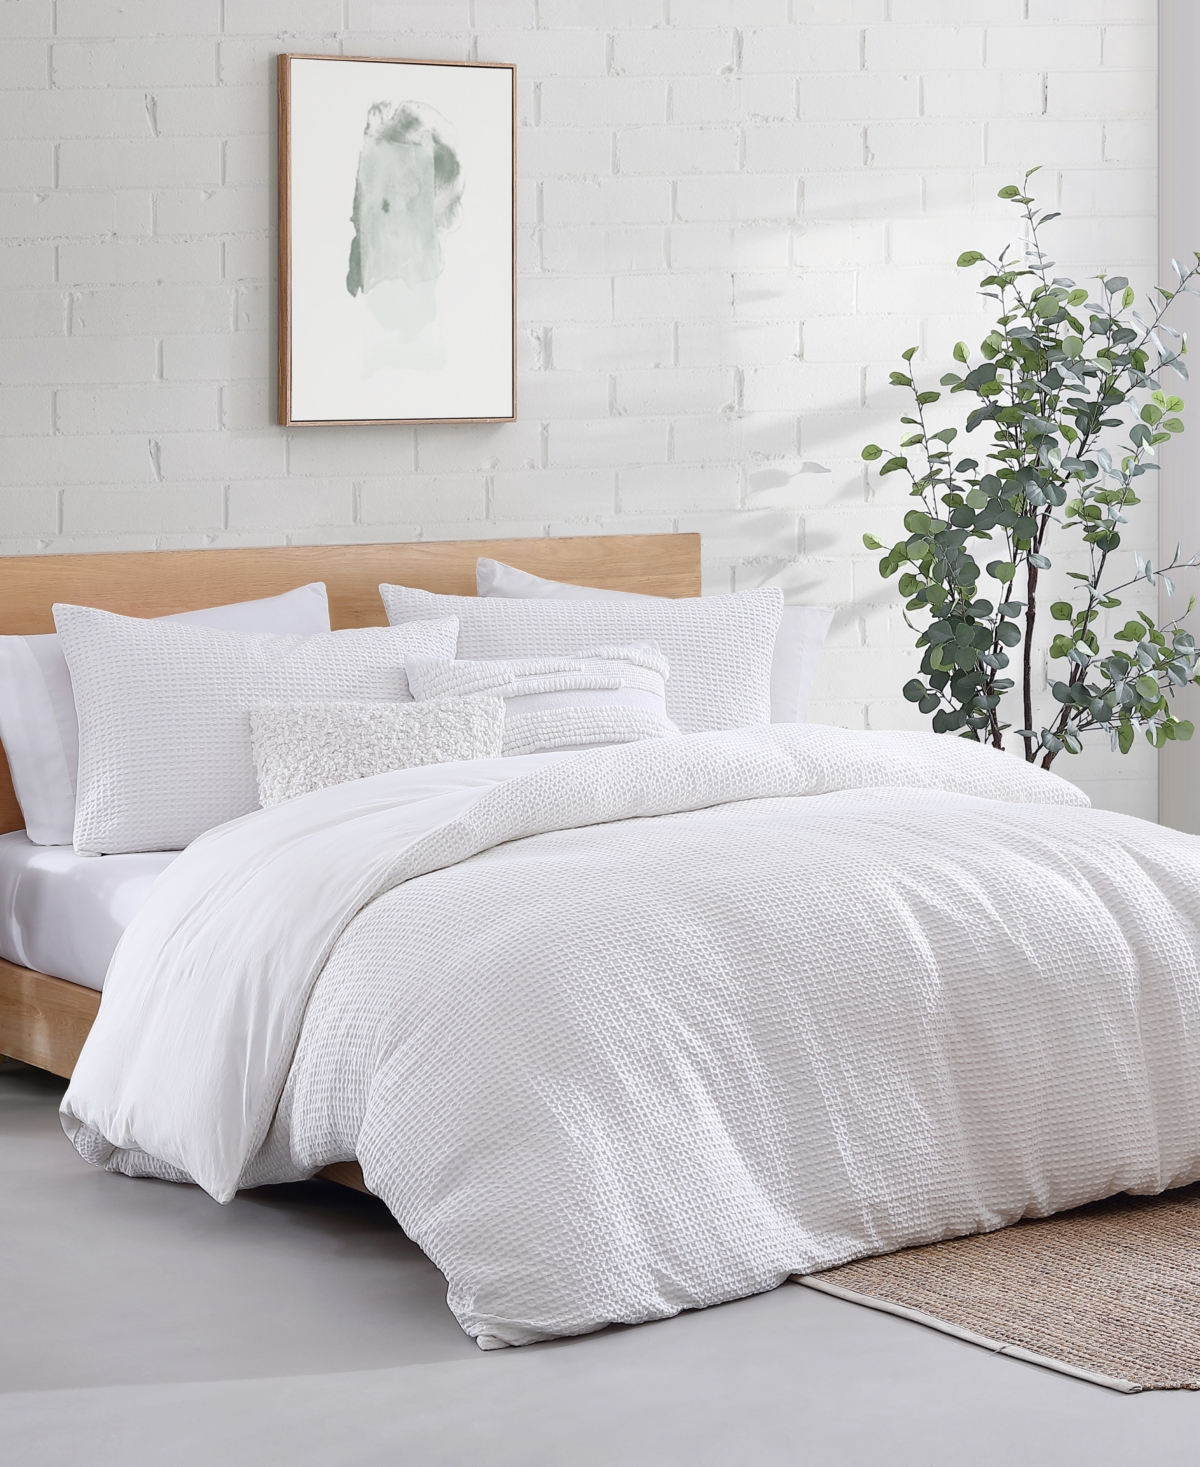 Dkny Modern Waffle 3 Piece Duvet Cover Set, Queen In White